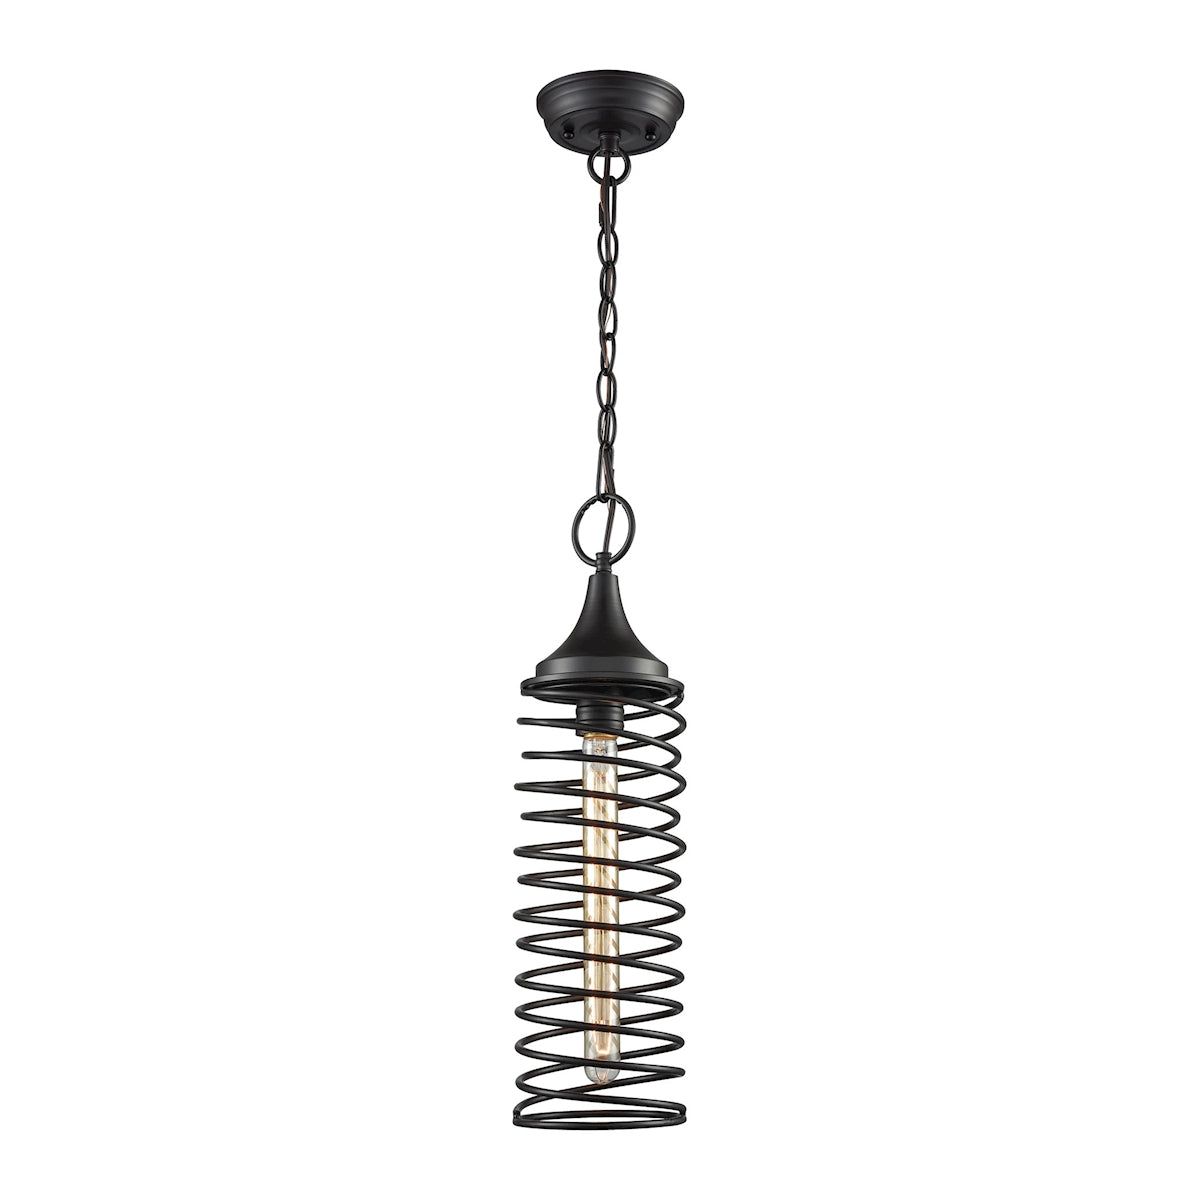 ELK Lighting 65231/1 Spring 1-Light Mini Pendant in Oil Rubbed Bronze with Twisted Metal Shade